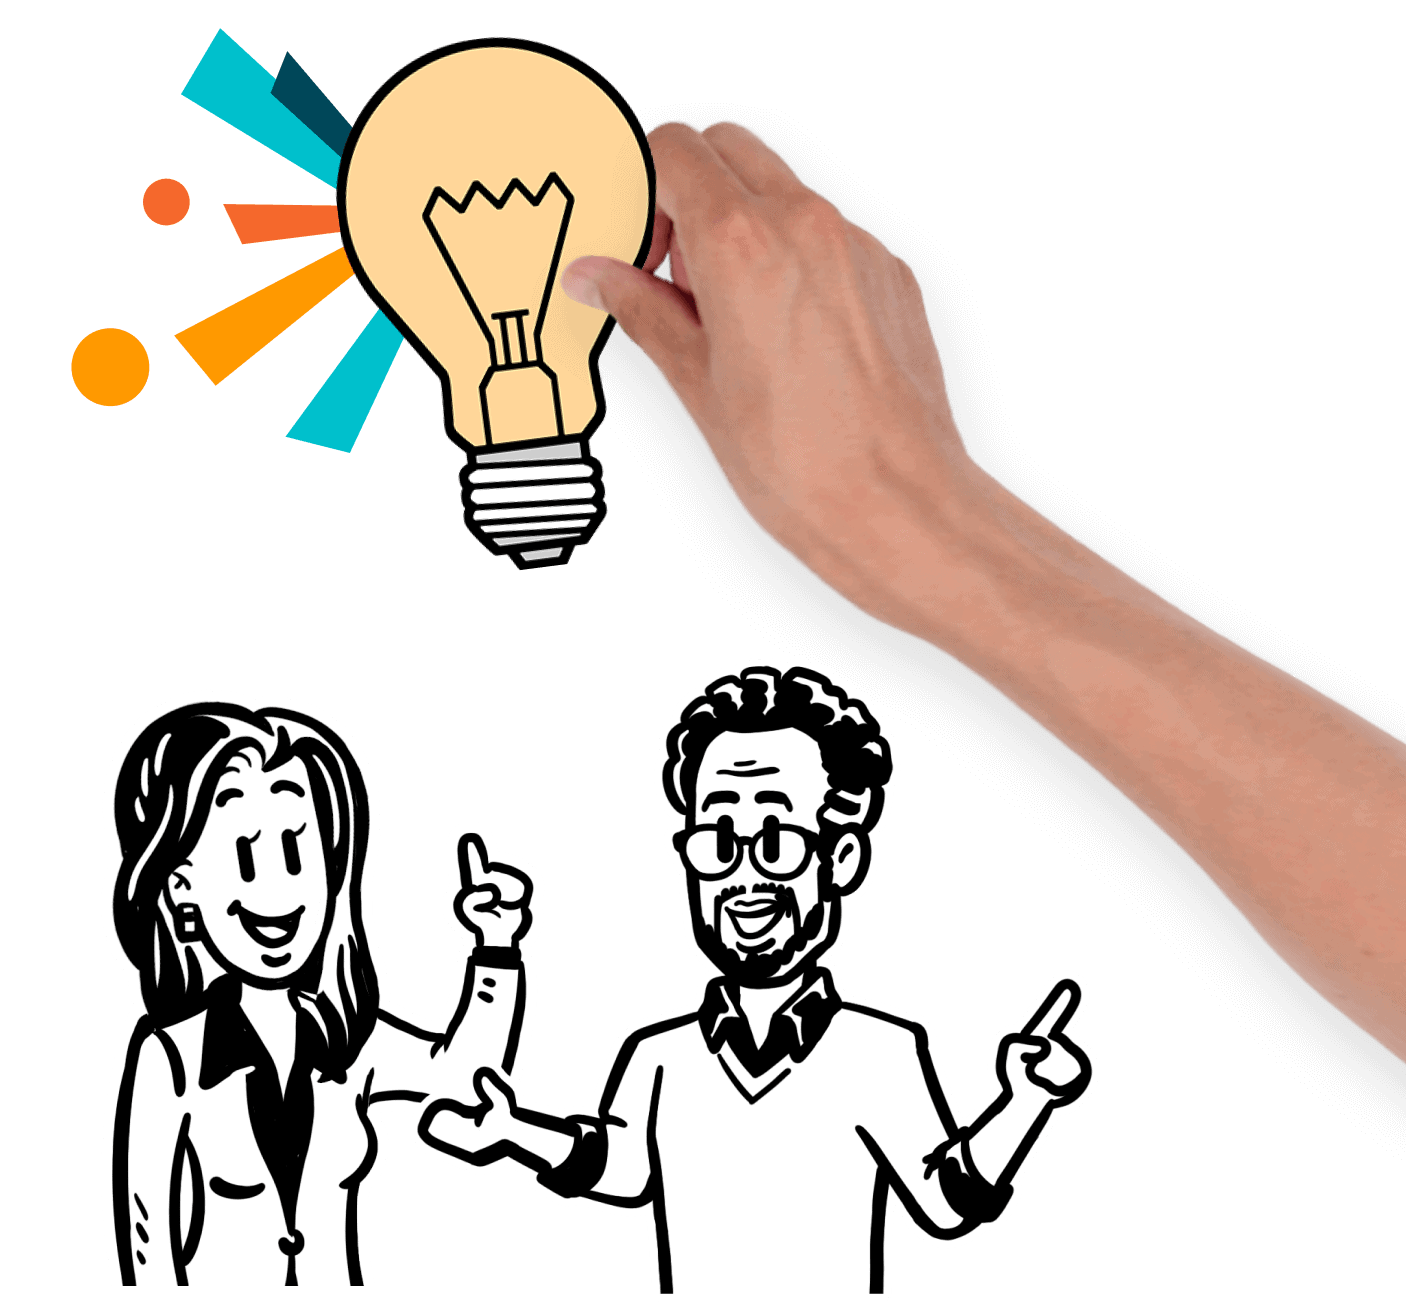 Two illustrations of a woman and a man in simpleshow classic style with a light bulb placed above their heads by a human hand